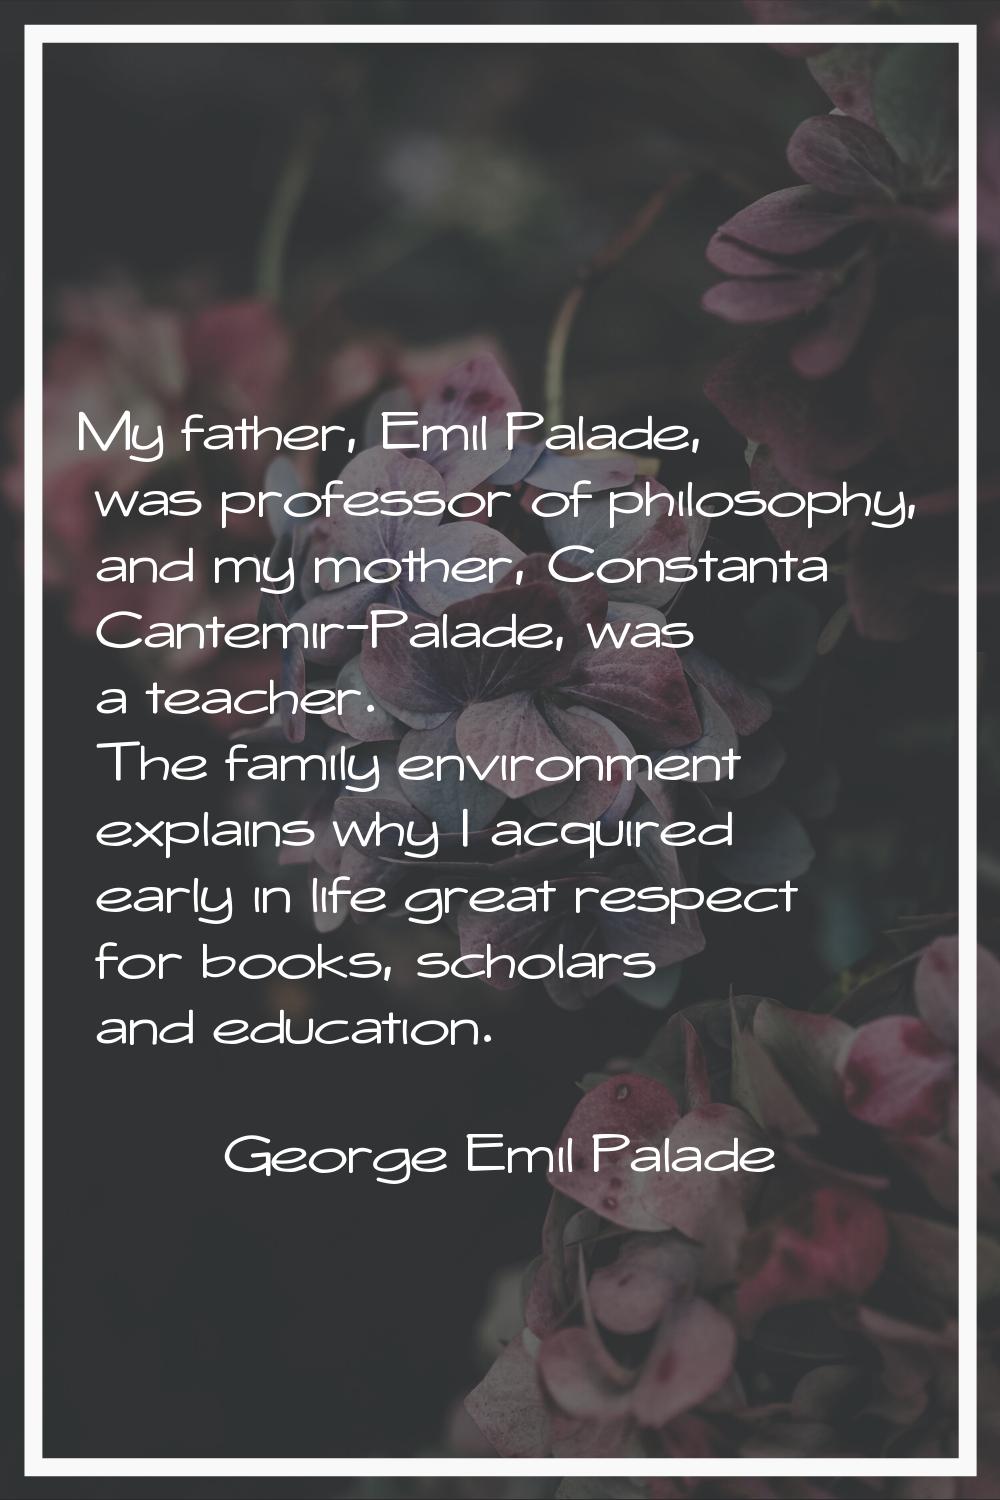 My father, Emil Palade, was professor of philosophy, and my mother, Constanta Cantemir-Palade, was 